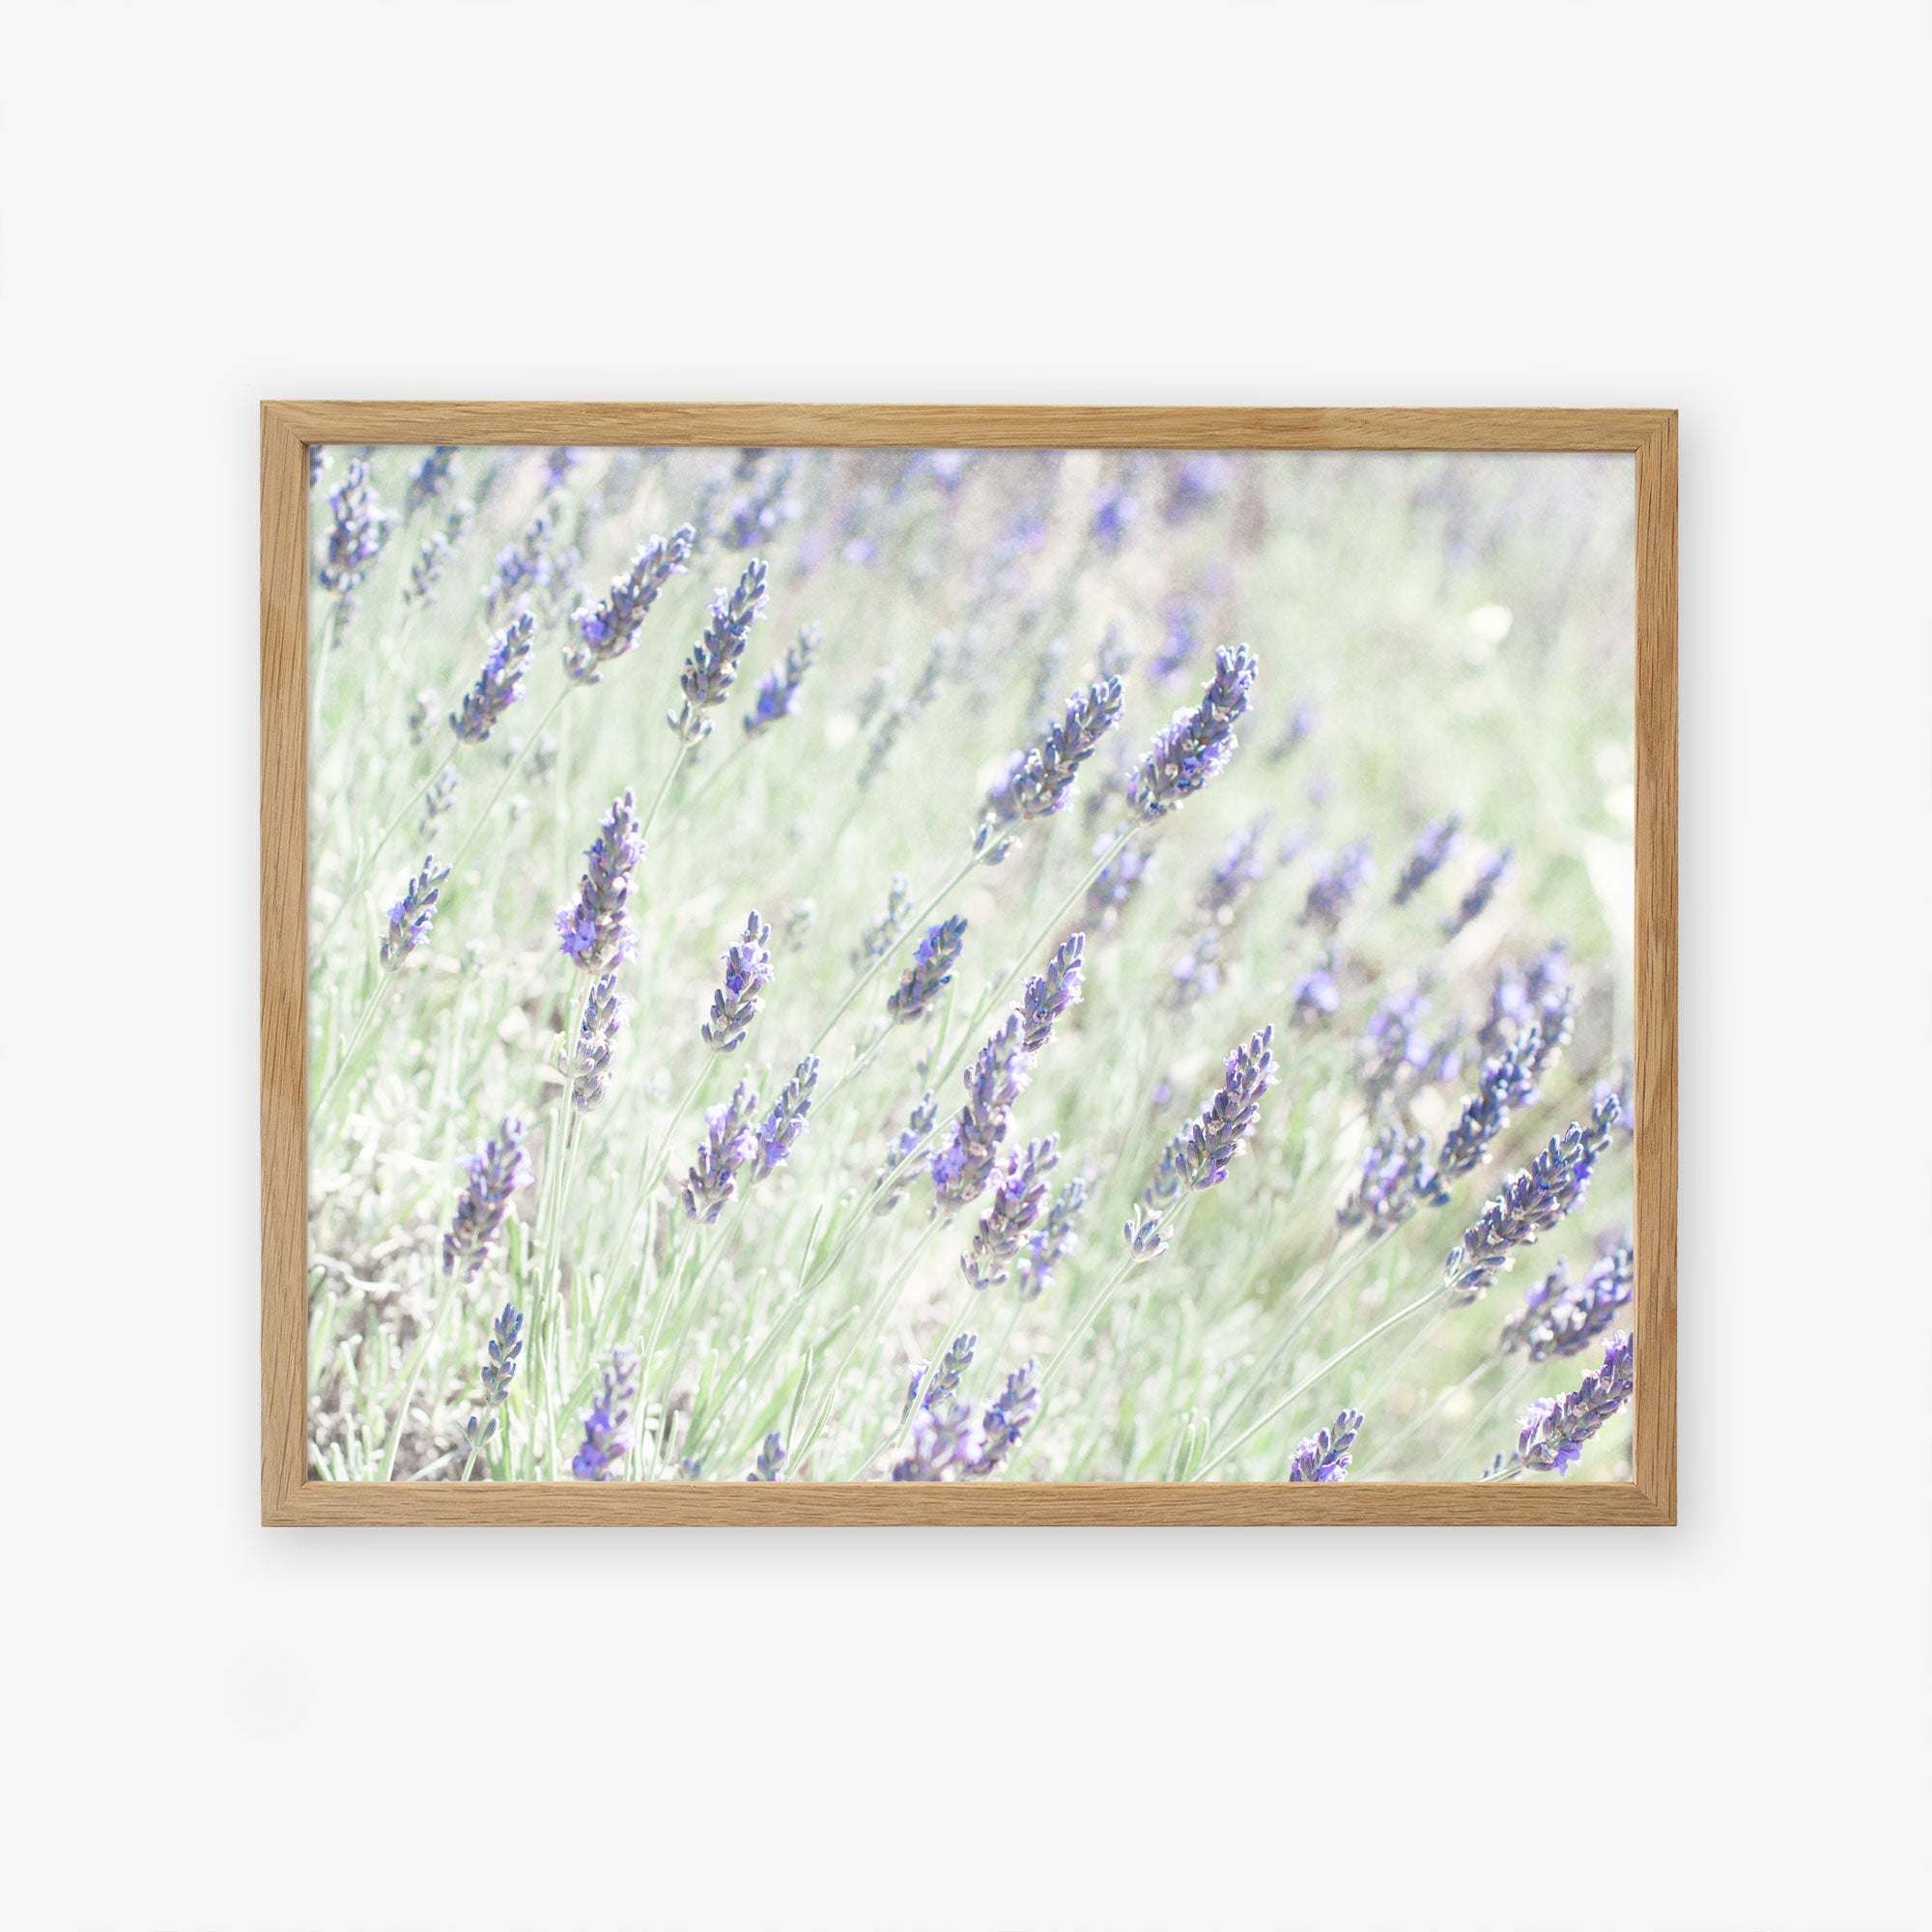 A framed photograph of a Floral Purple Print, &#39;Lavender for LaLa&#39; by Offley Green, with vibrant purple and green hues standing out against a pale background, printed on archival photographic paper and mounted on a white wall.